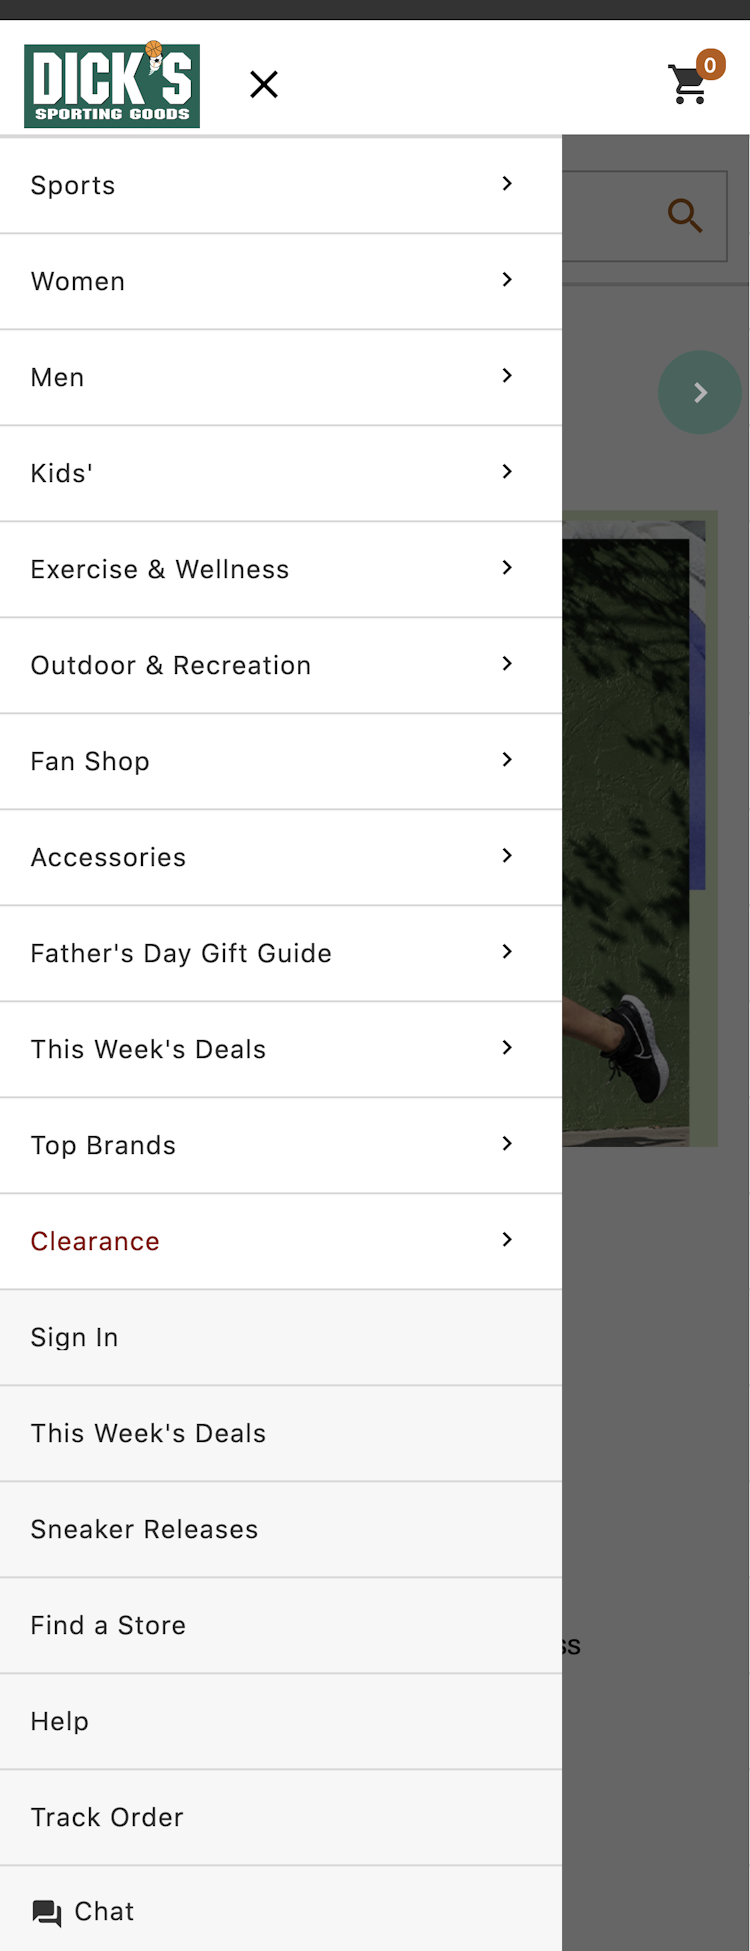 Father's Day Gift Guide with Dick's Sporting Goods